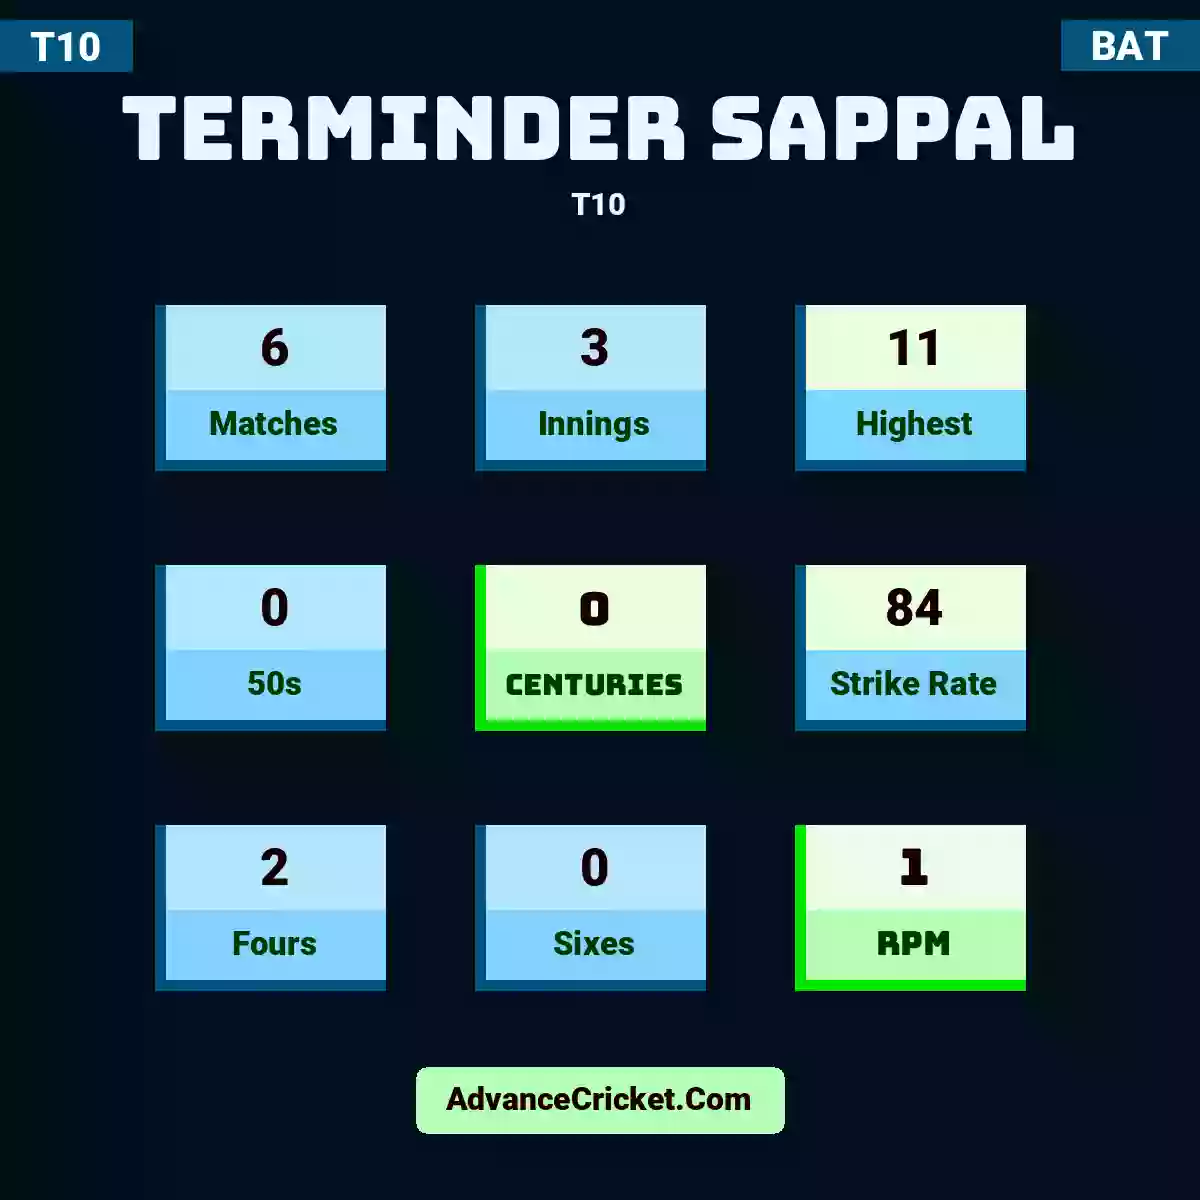 Terminder Sappal T10 , Terminder Sappal played 6 matches, scored 11 runs as highest, 0 half-centuries, and 0 centuries, with a strike rate of 84. T.Sappal hit 2 fours and 0 sixes, with an RPM of 1.